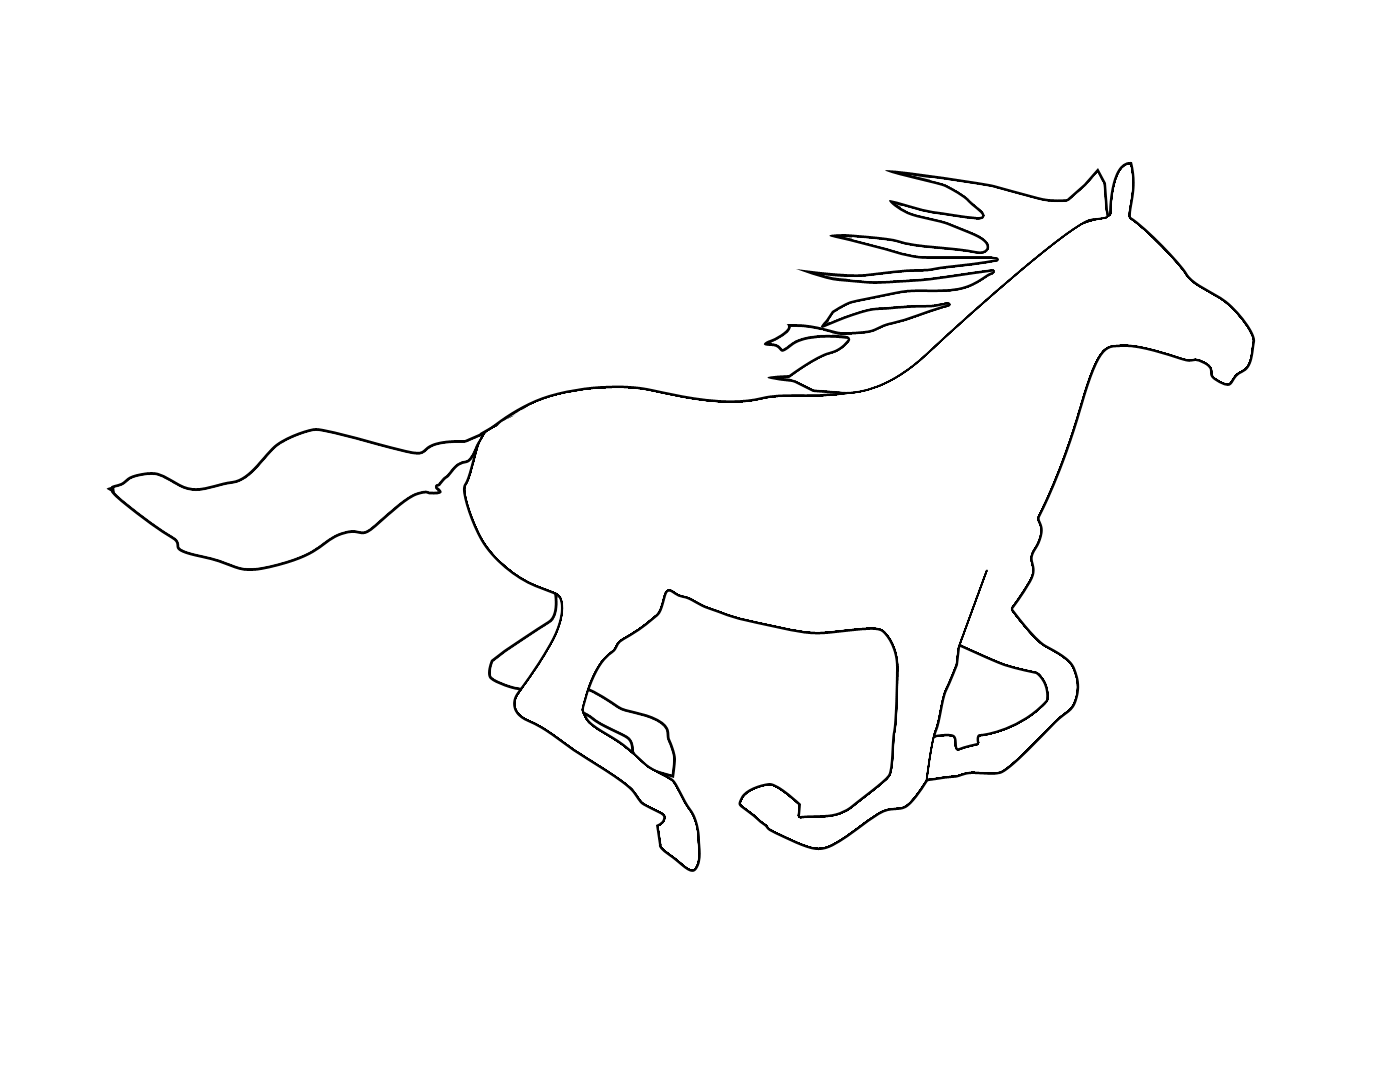 free-printable-horse-outline-download-free-printable-horse-outline-png